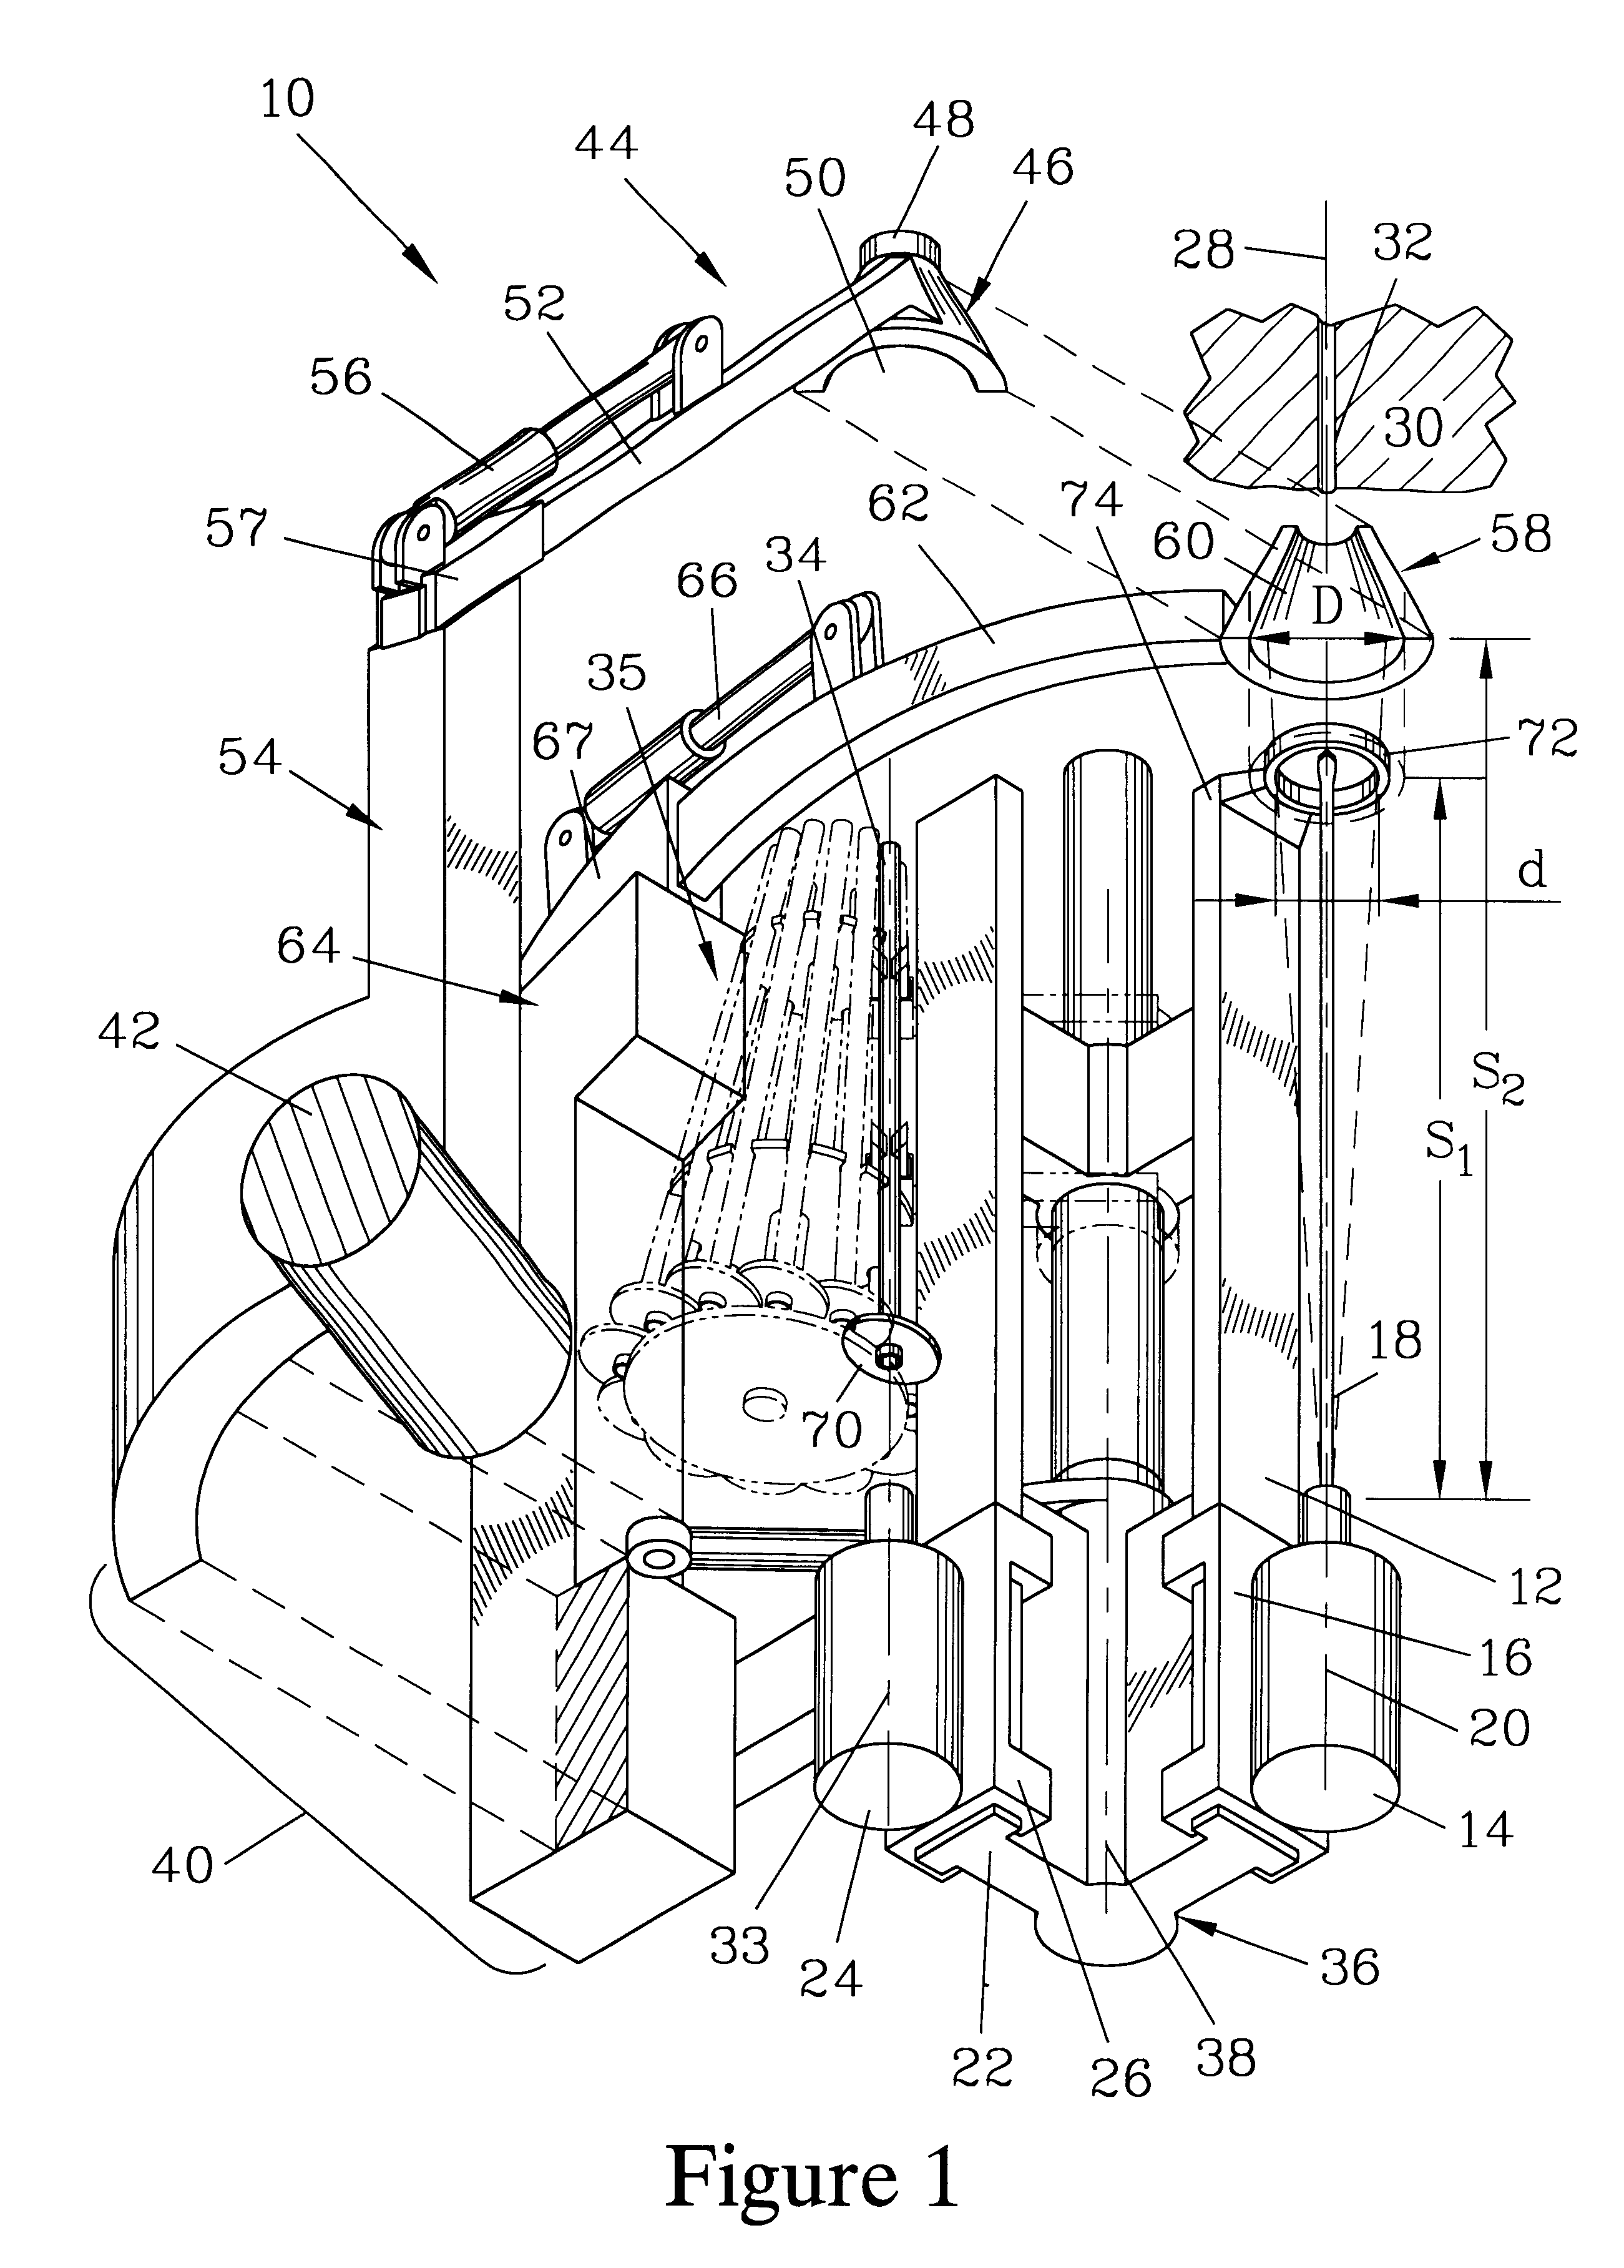 Turret rock bolter with stinger/centralizer